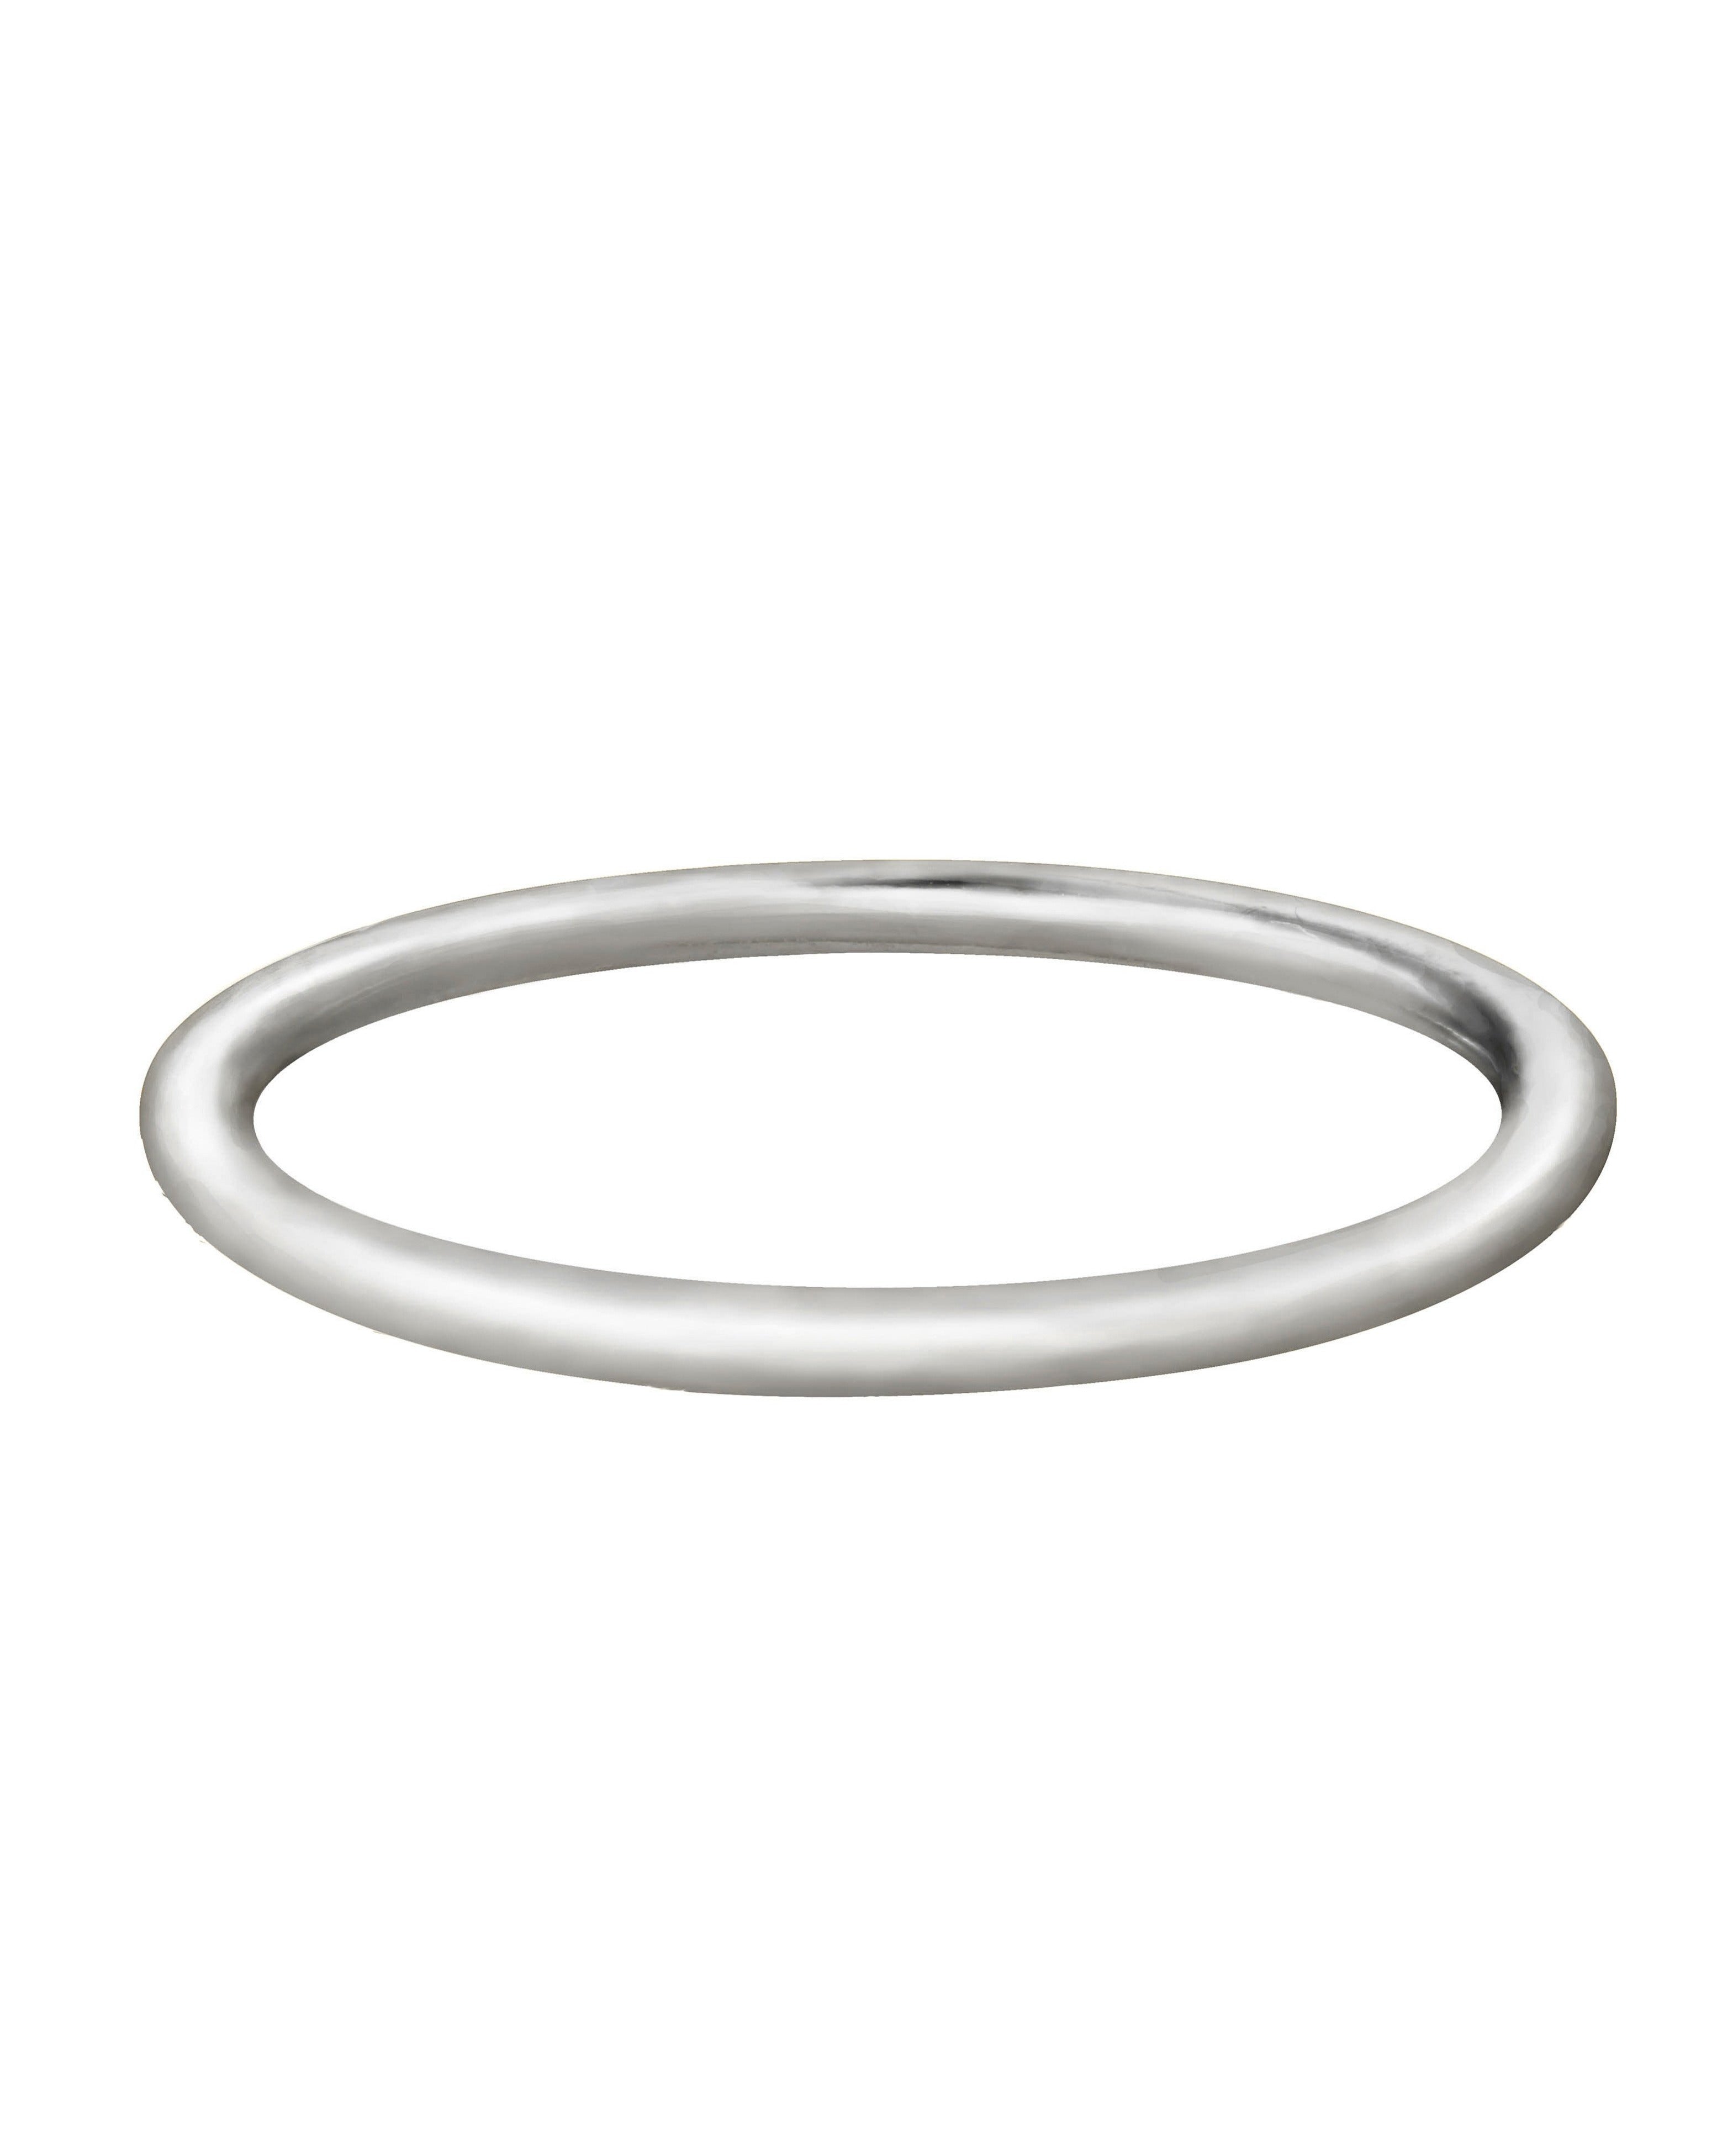 Berkley Ring by KOZAKH. A simple 2mm thick stackable ring crafted in Sterling Silver.